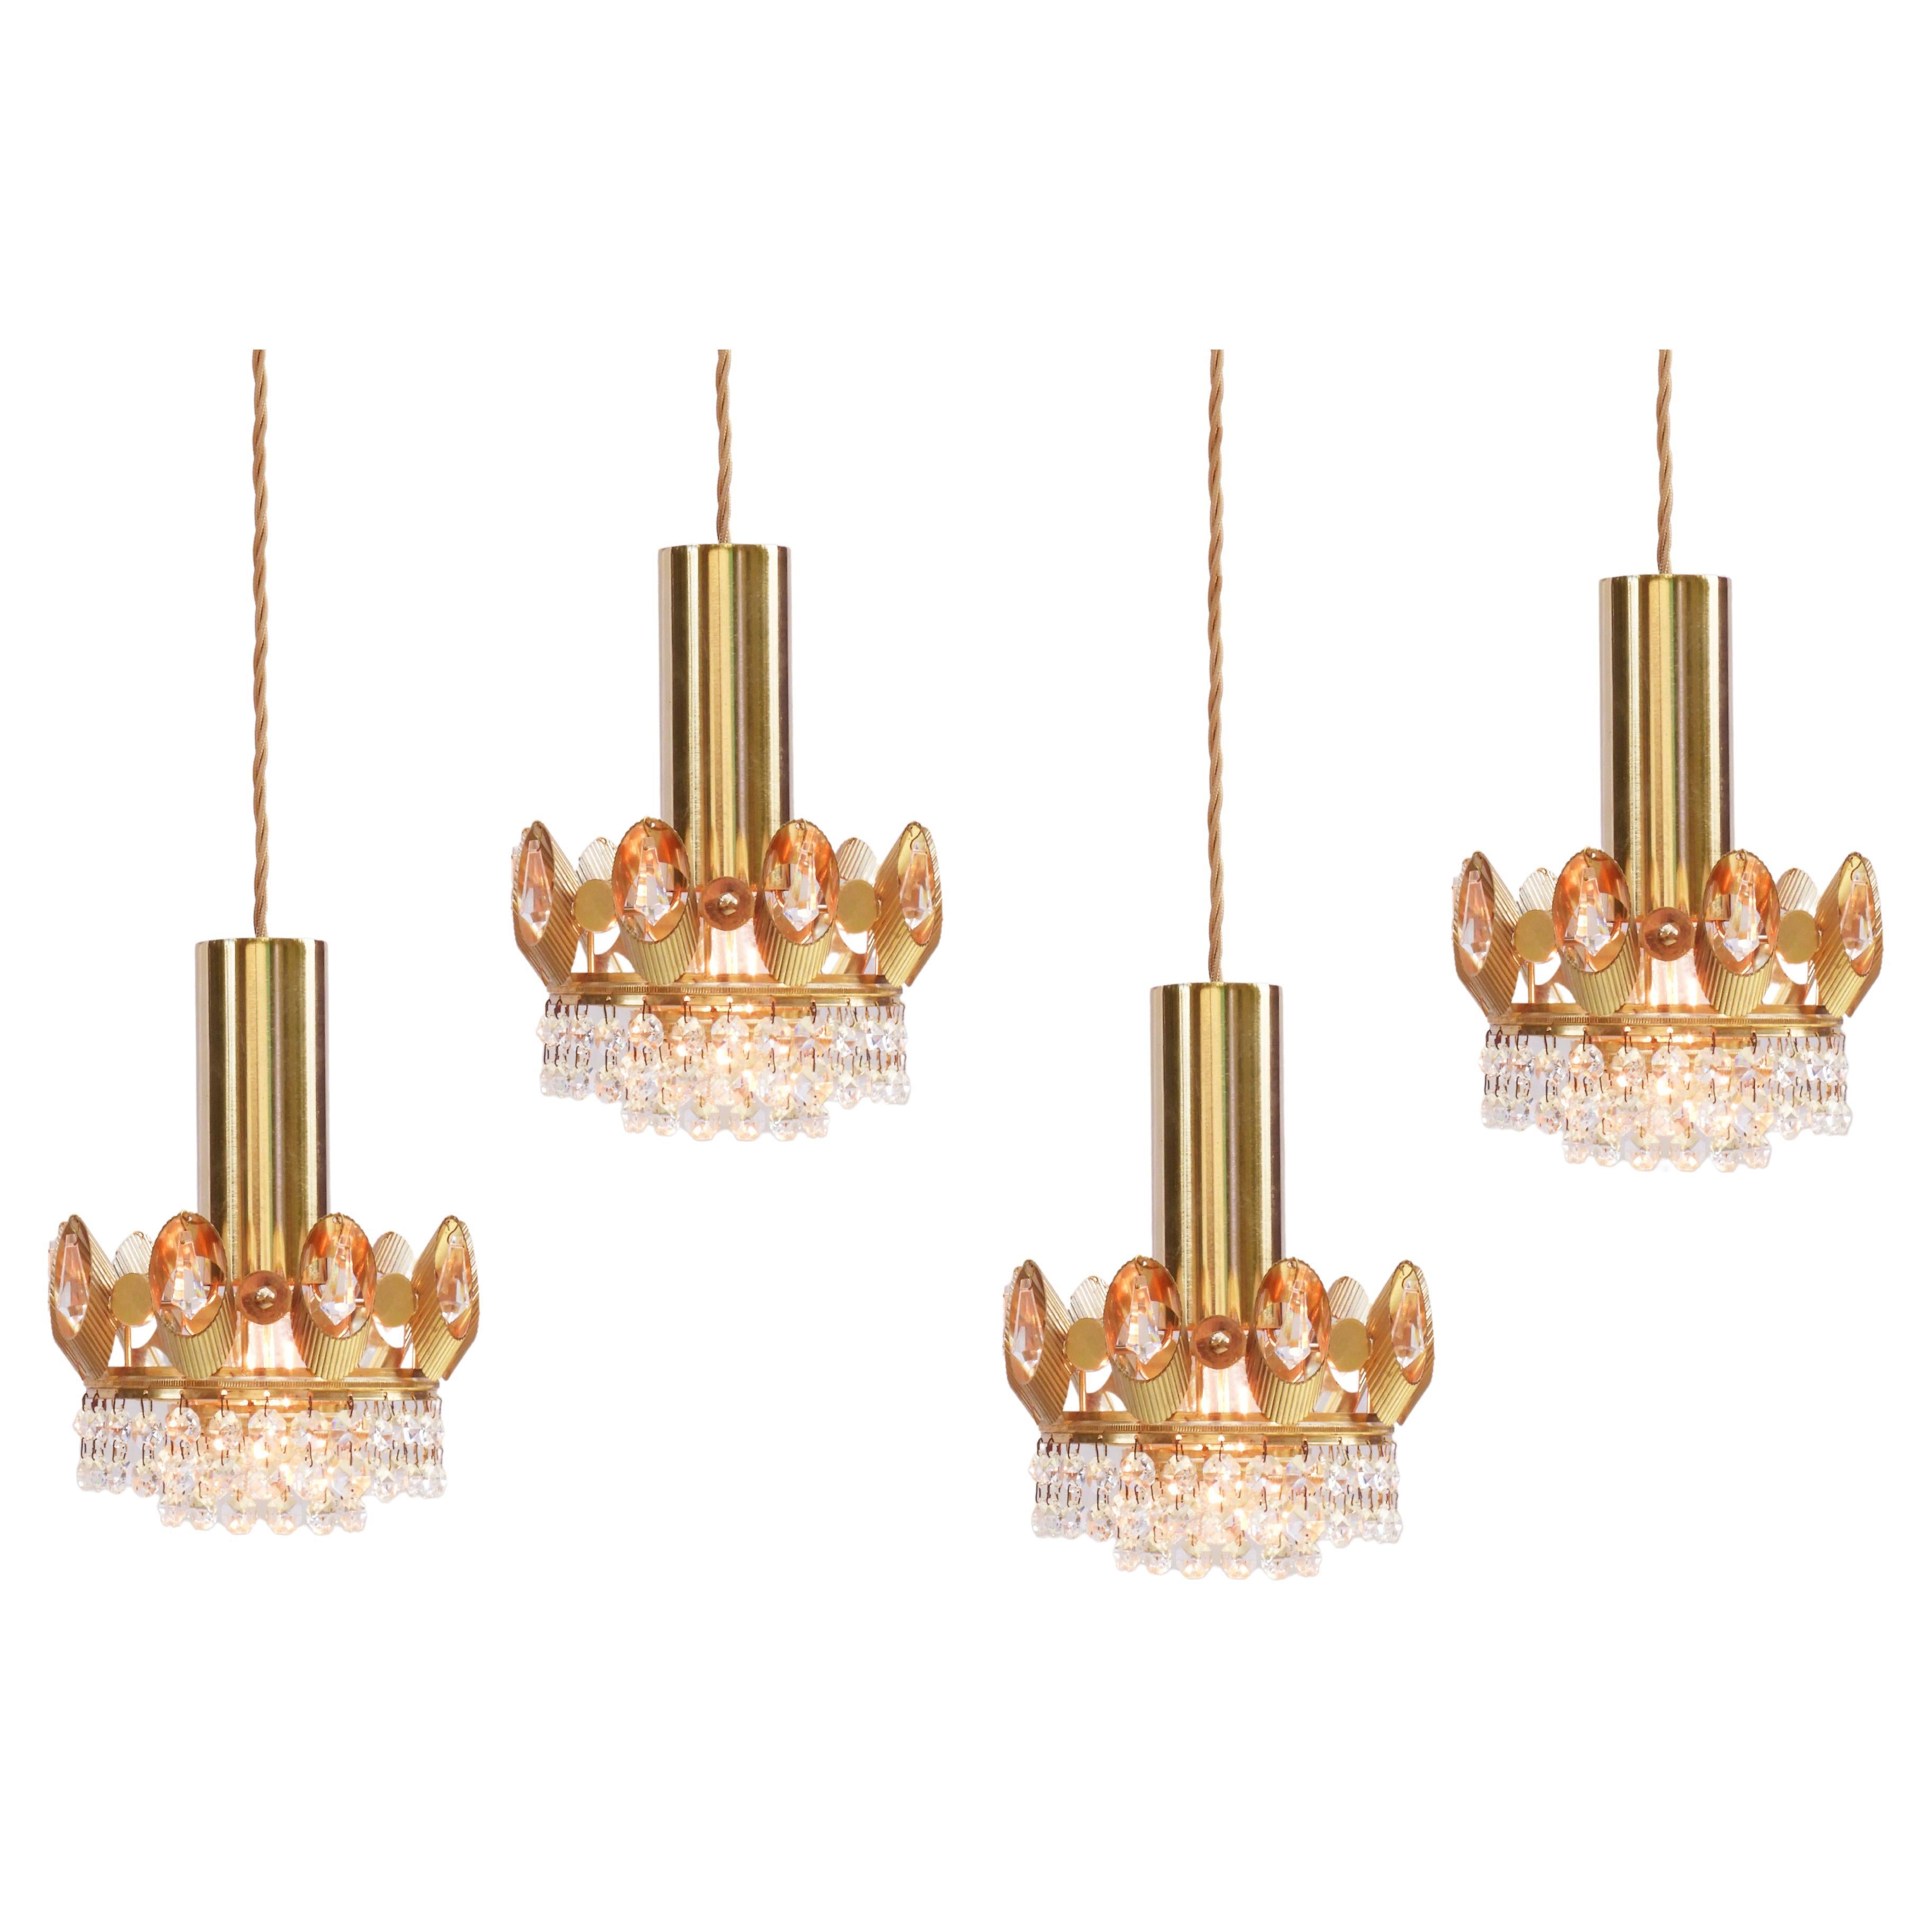 Palwa Crown Pendant Light Chandeliers, C1970s, Germany  For Sale 1